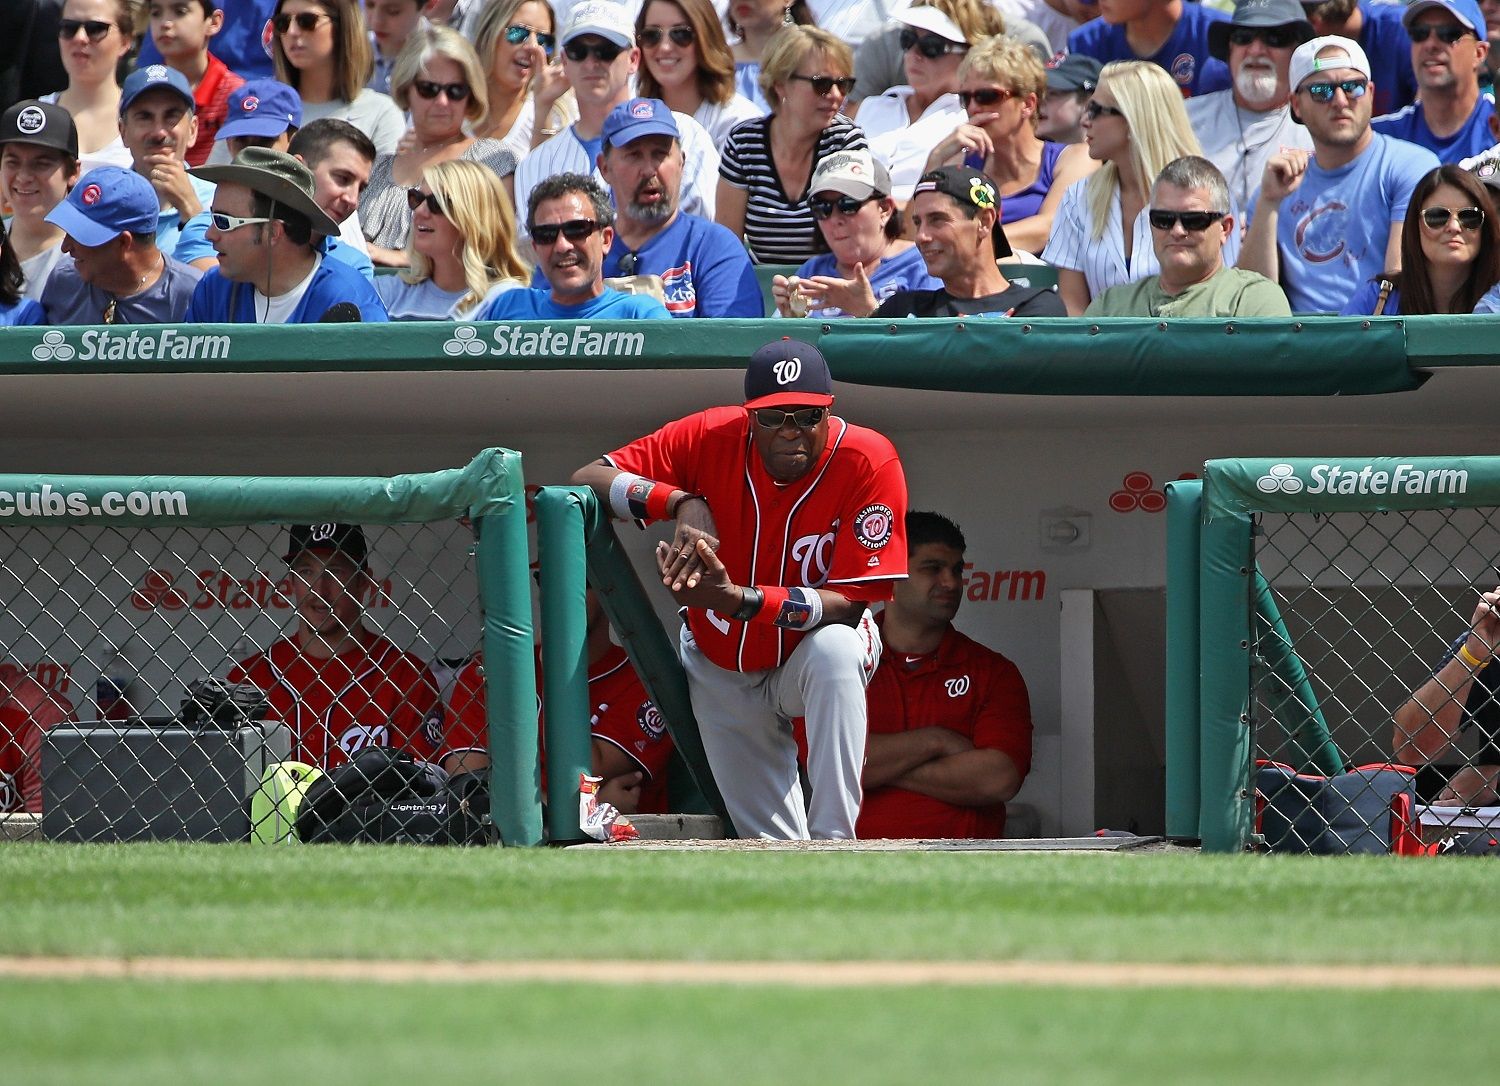 CHICAGO, IL - AUGUST 05:  Manager Dusty Baker #12 of the Washington Nationals watches as his team takes on the Chicago Cubs at Wrigley Field on August 5, 2017 in Chicago, Illinois.  (Photo by Jonathan Daniel/Getty Images)